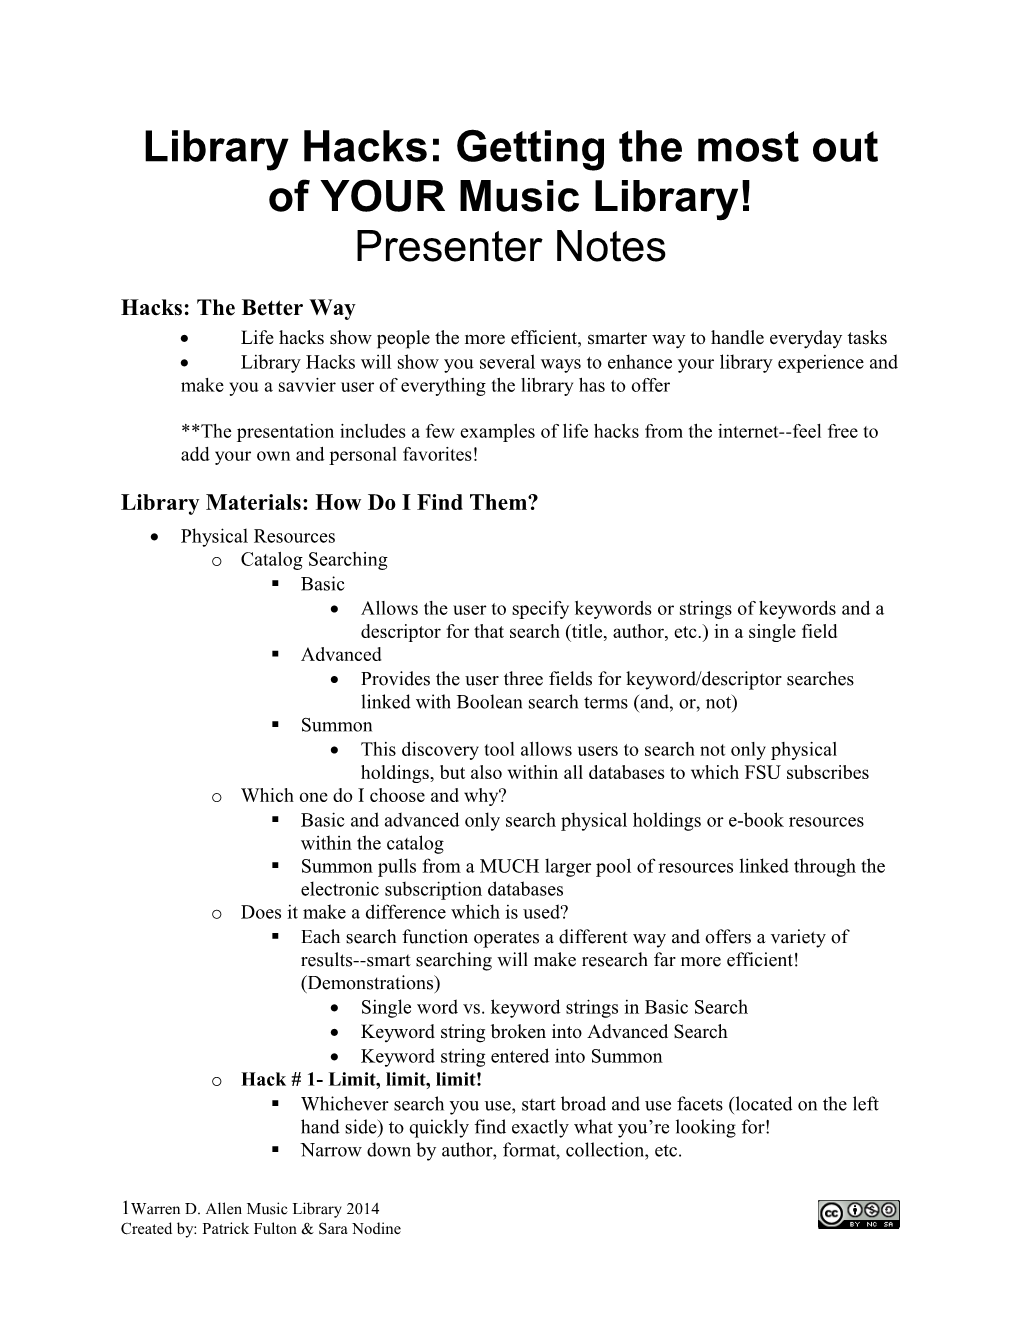 Library Hacks: Getting the Most out of YOUR Music Library!